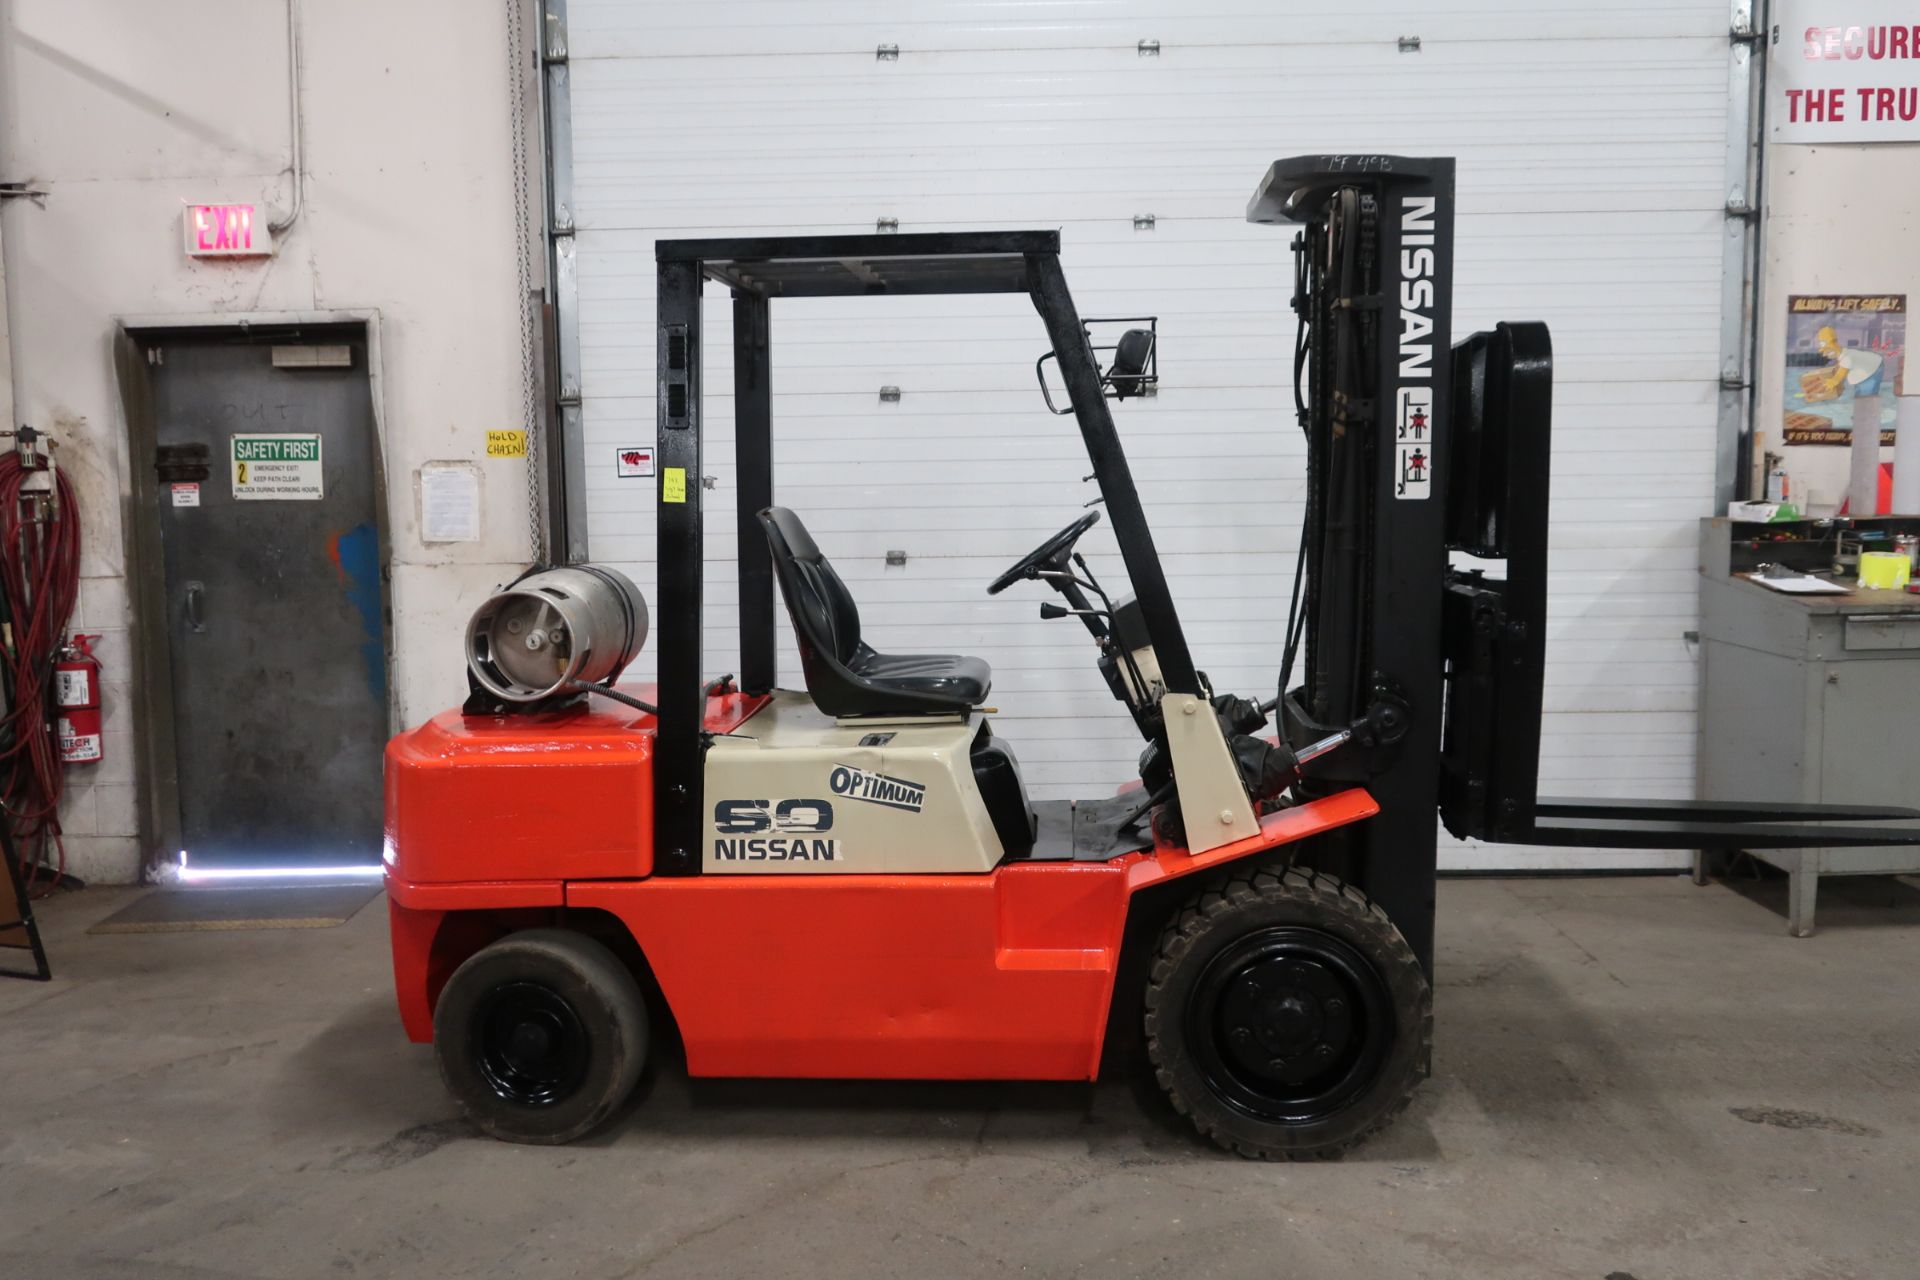 FREE CUSTOMS - Nissan Optimum OUTDOOR 6000lbs max Capacity Forklift with 3-stage mast - LPG (